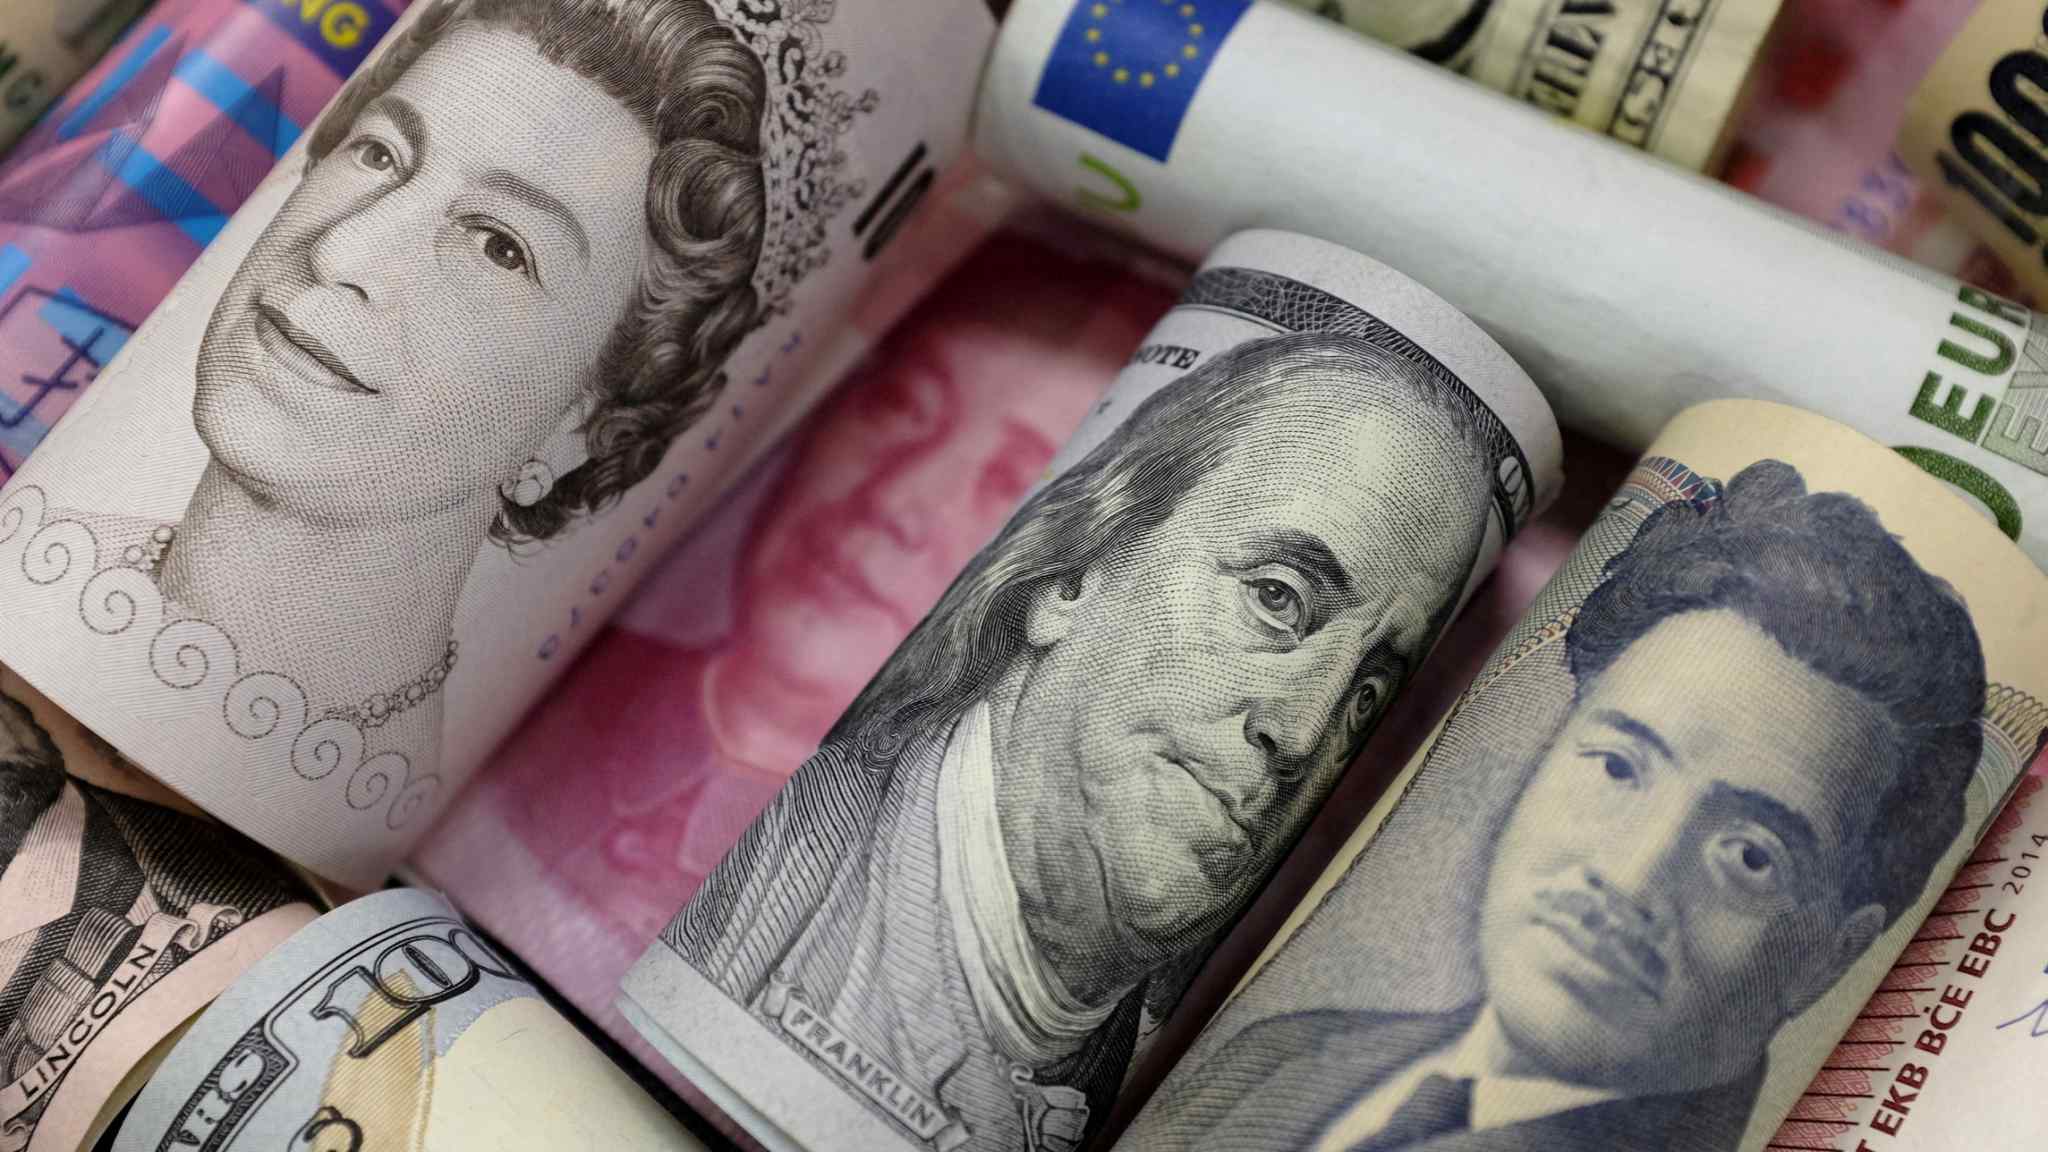 UK economy latest: Sterling claws back losses and climbs above $1.10